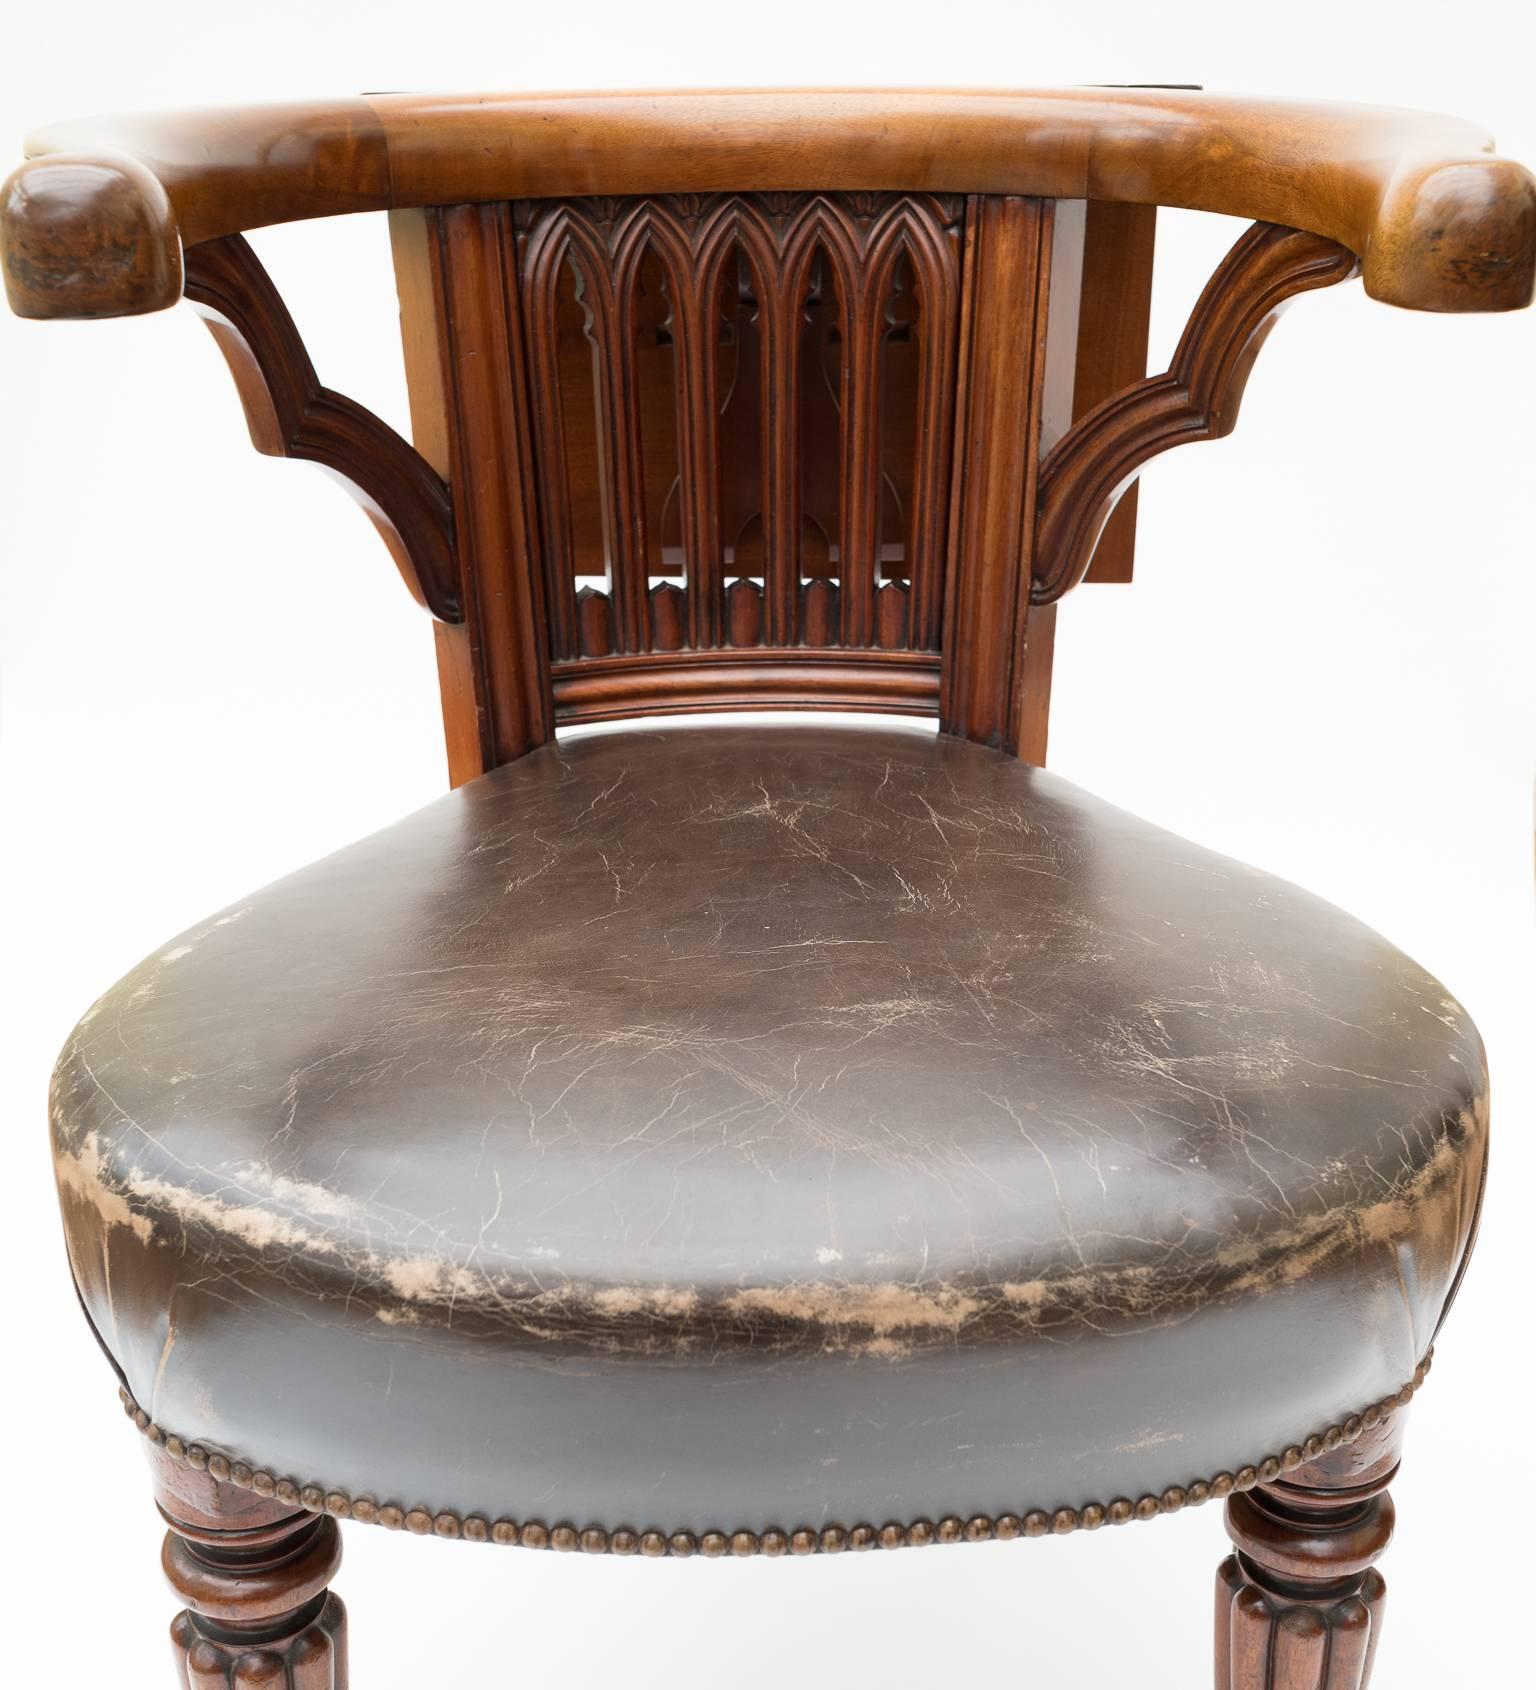 A wonderful example of an early 19th century Georgian brass-mounted mahogany library chair which is also sometimes referred to as a cockfighting chair. 

The reading slope can slide around the rear of the chair via the brass track enabling the